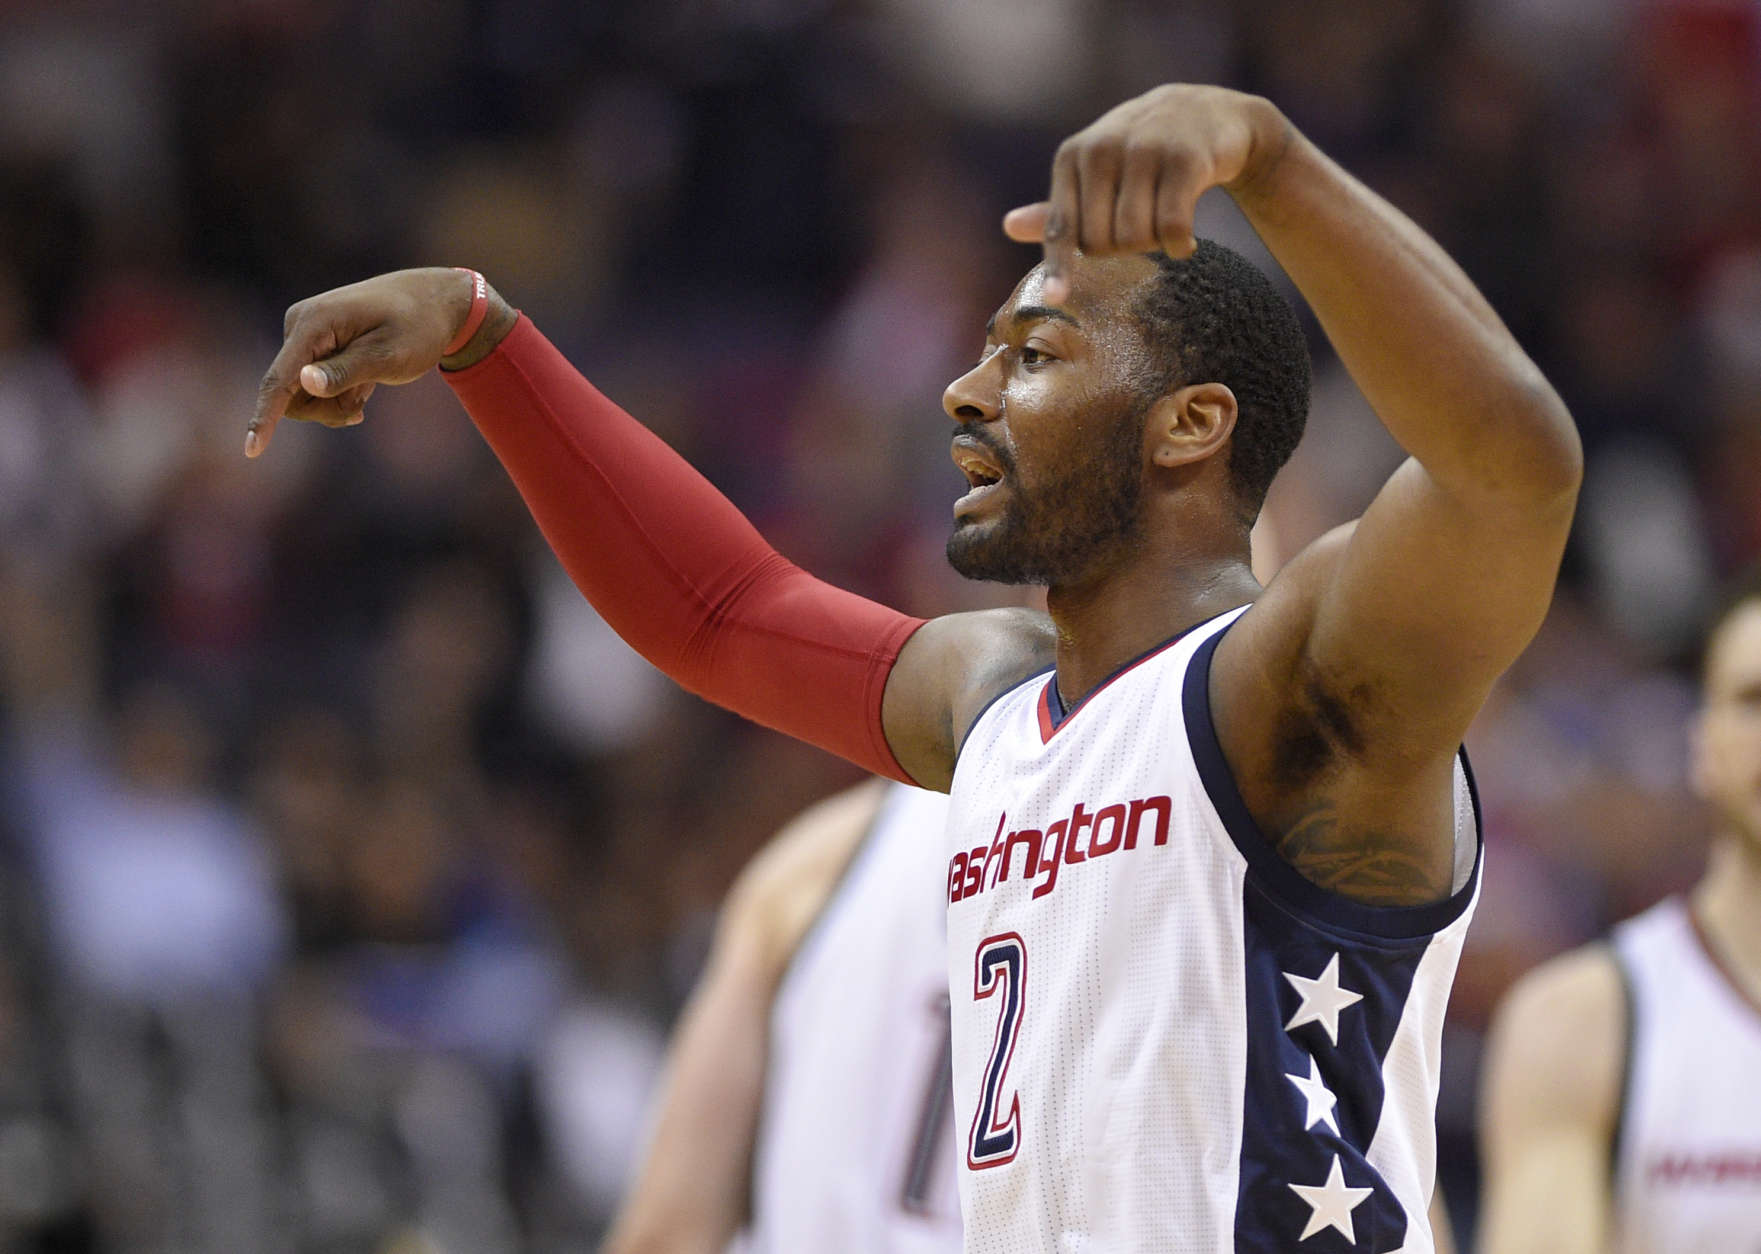 Washington Wizards guard John Wall (2) gestures after a basket during the second half in Game 5 of the team's first-round NBA basketball playoff series against the Atlanta Hawks, Wednesday, April 26, 2017, in Washington. The Wizards won 103-99. (AP Photo/Nick Wass)